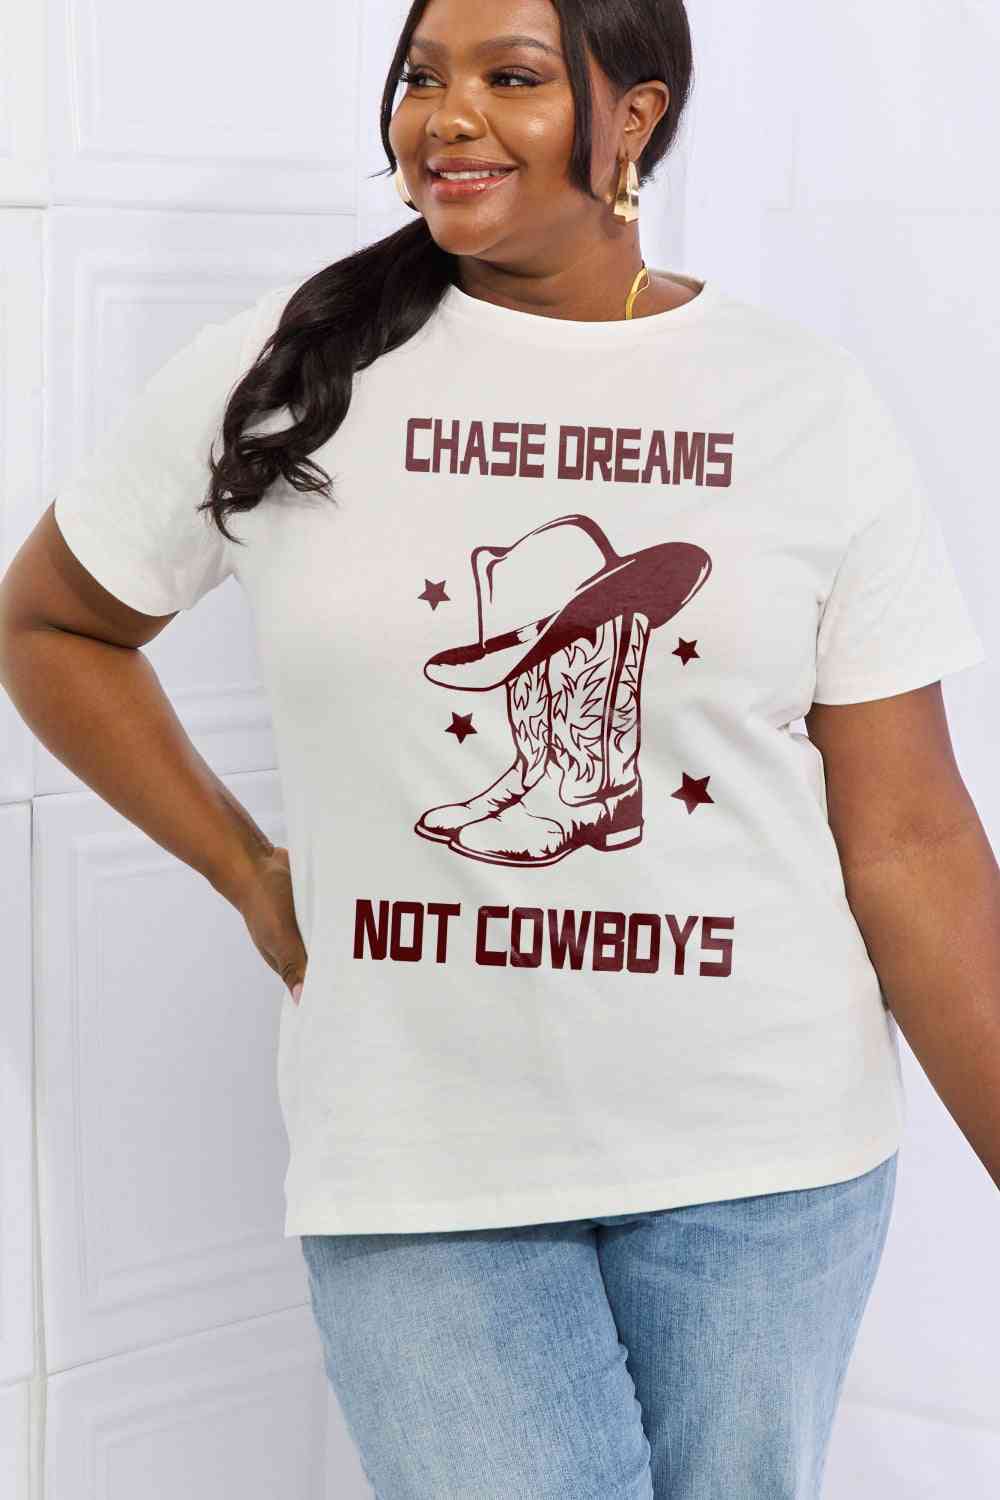 CHASE DREAMS NOT COWBOYS Graphic Cotton Tee - White / S - T-Shirts - Shirts & Tops - 8 - 2024